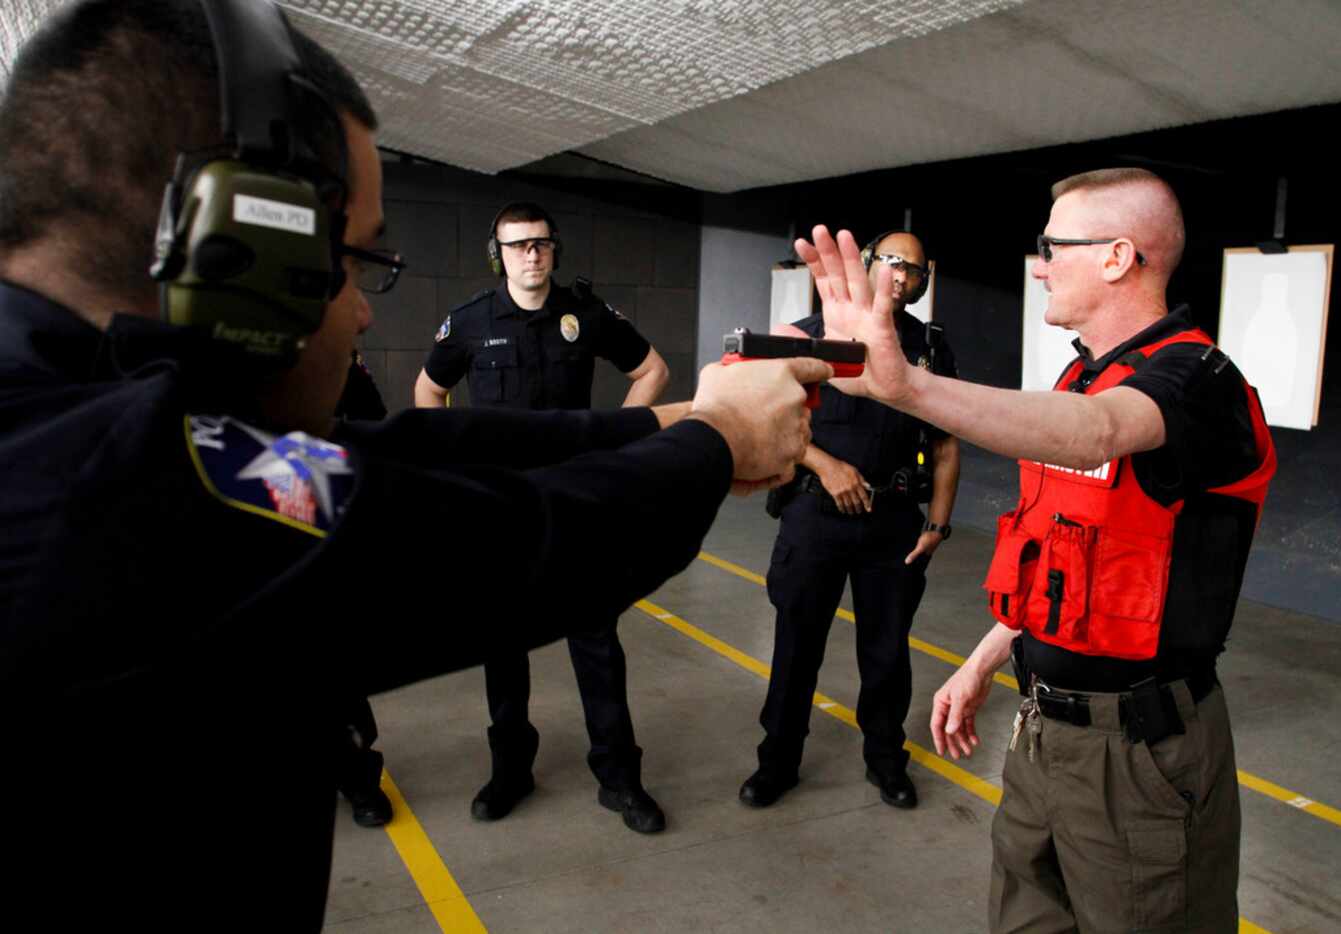 Ricky Pollan, range master of the Allen Police Department, uses a training pistol to show...